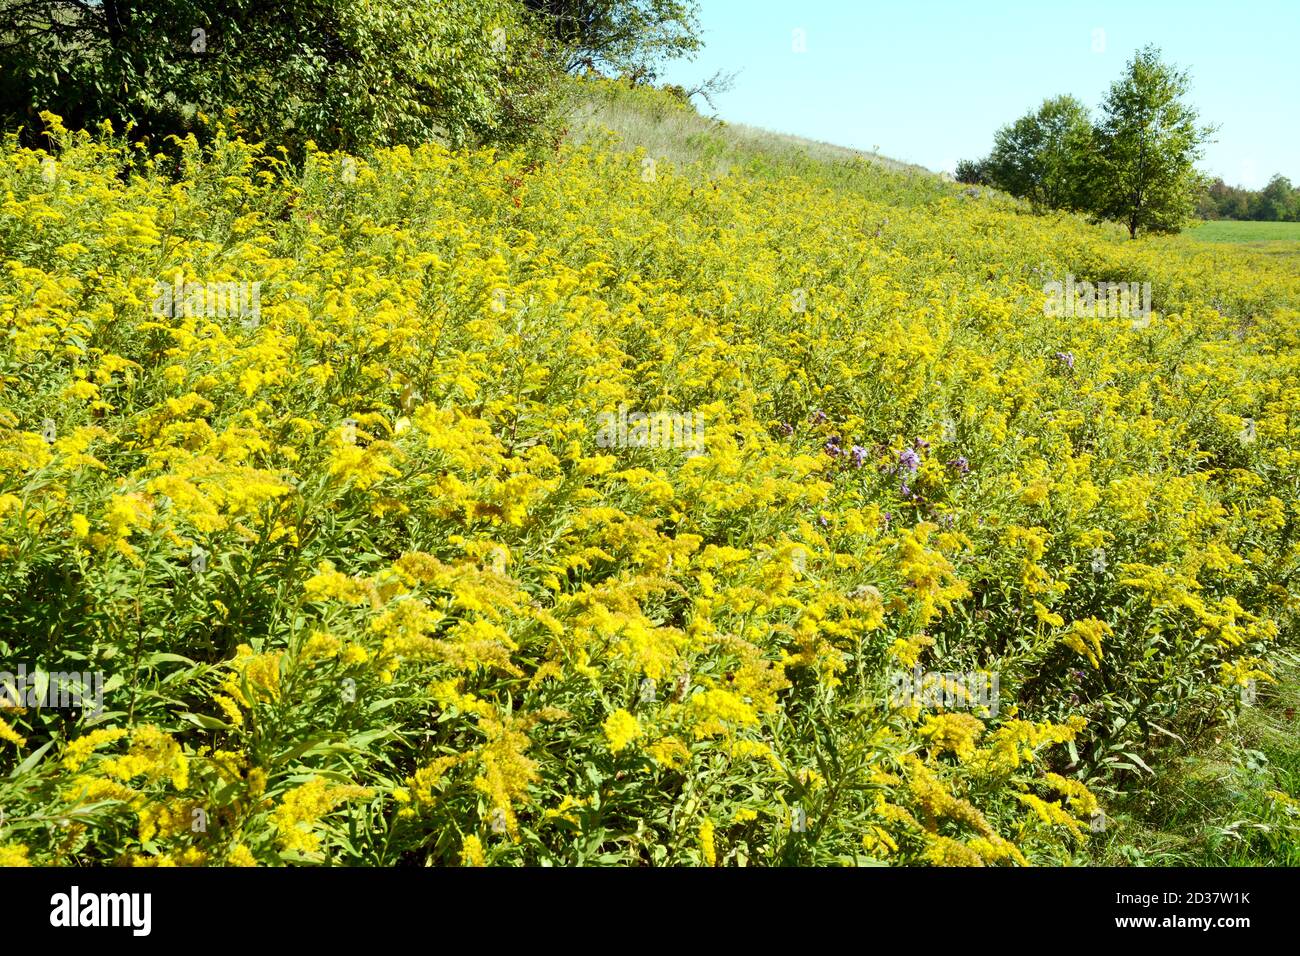 A field of goldenrod wildflowers (solidago) on the Bruce Trail in Boyne Valley Provincial Park, Ontario, Canada. Stock Photo